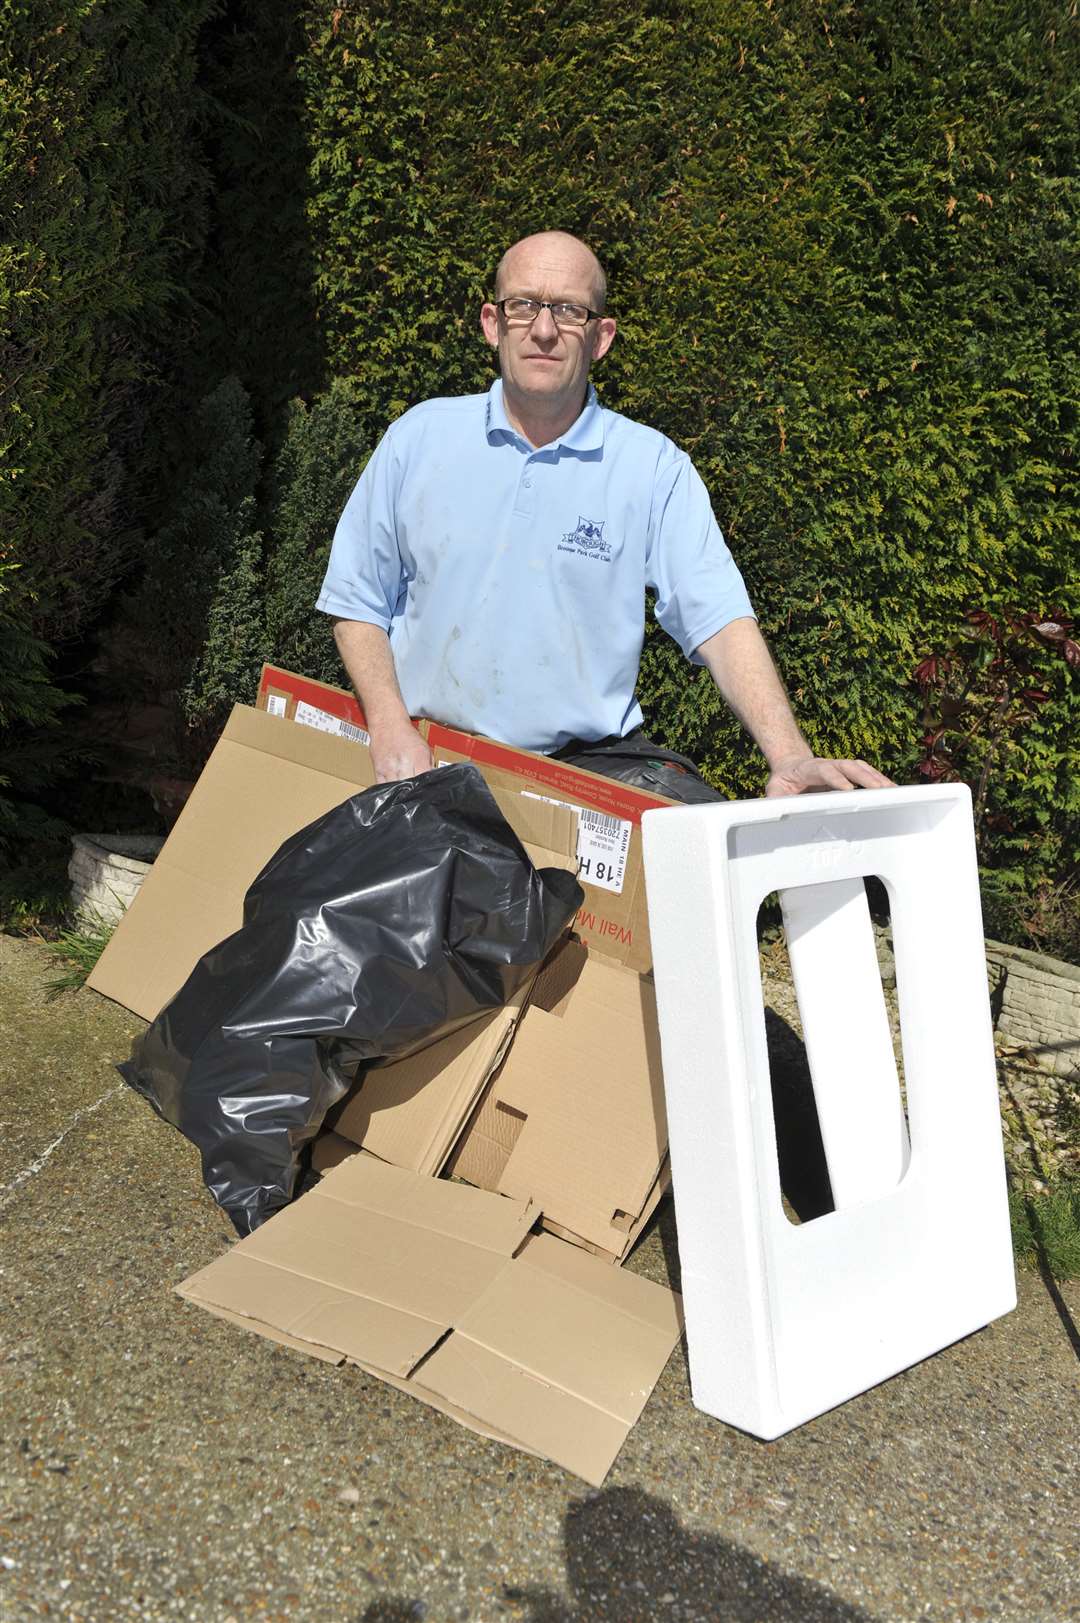 Nick Philpott with a few bits of cardboard and polystyrene that he says would cost £54